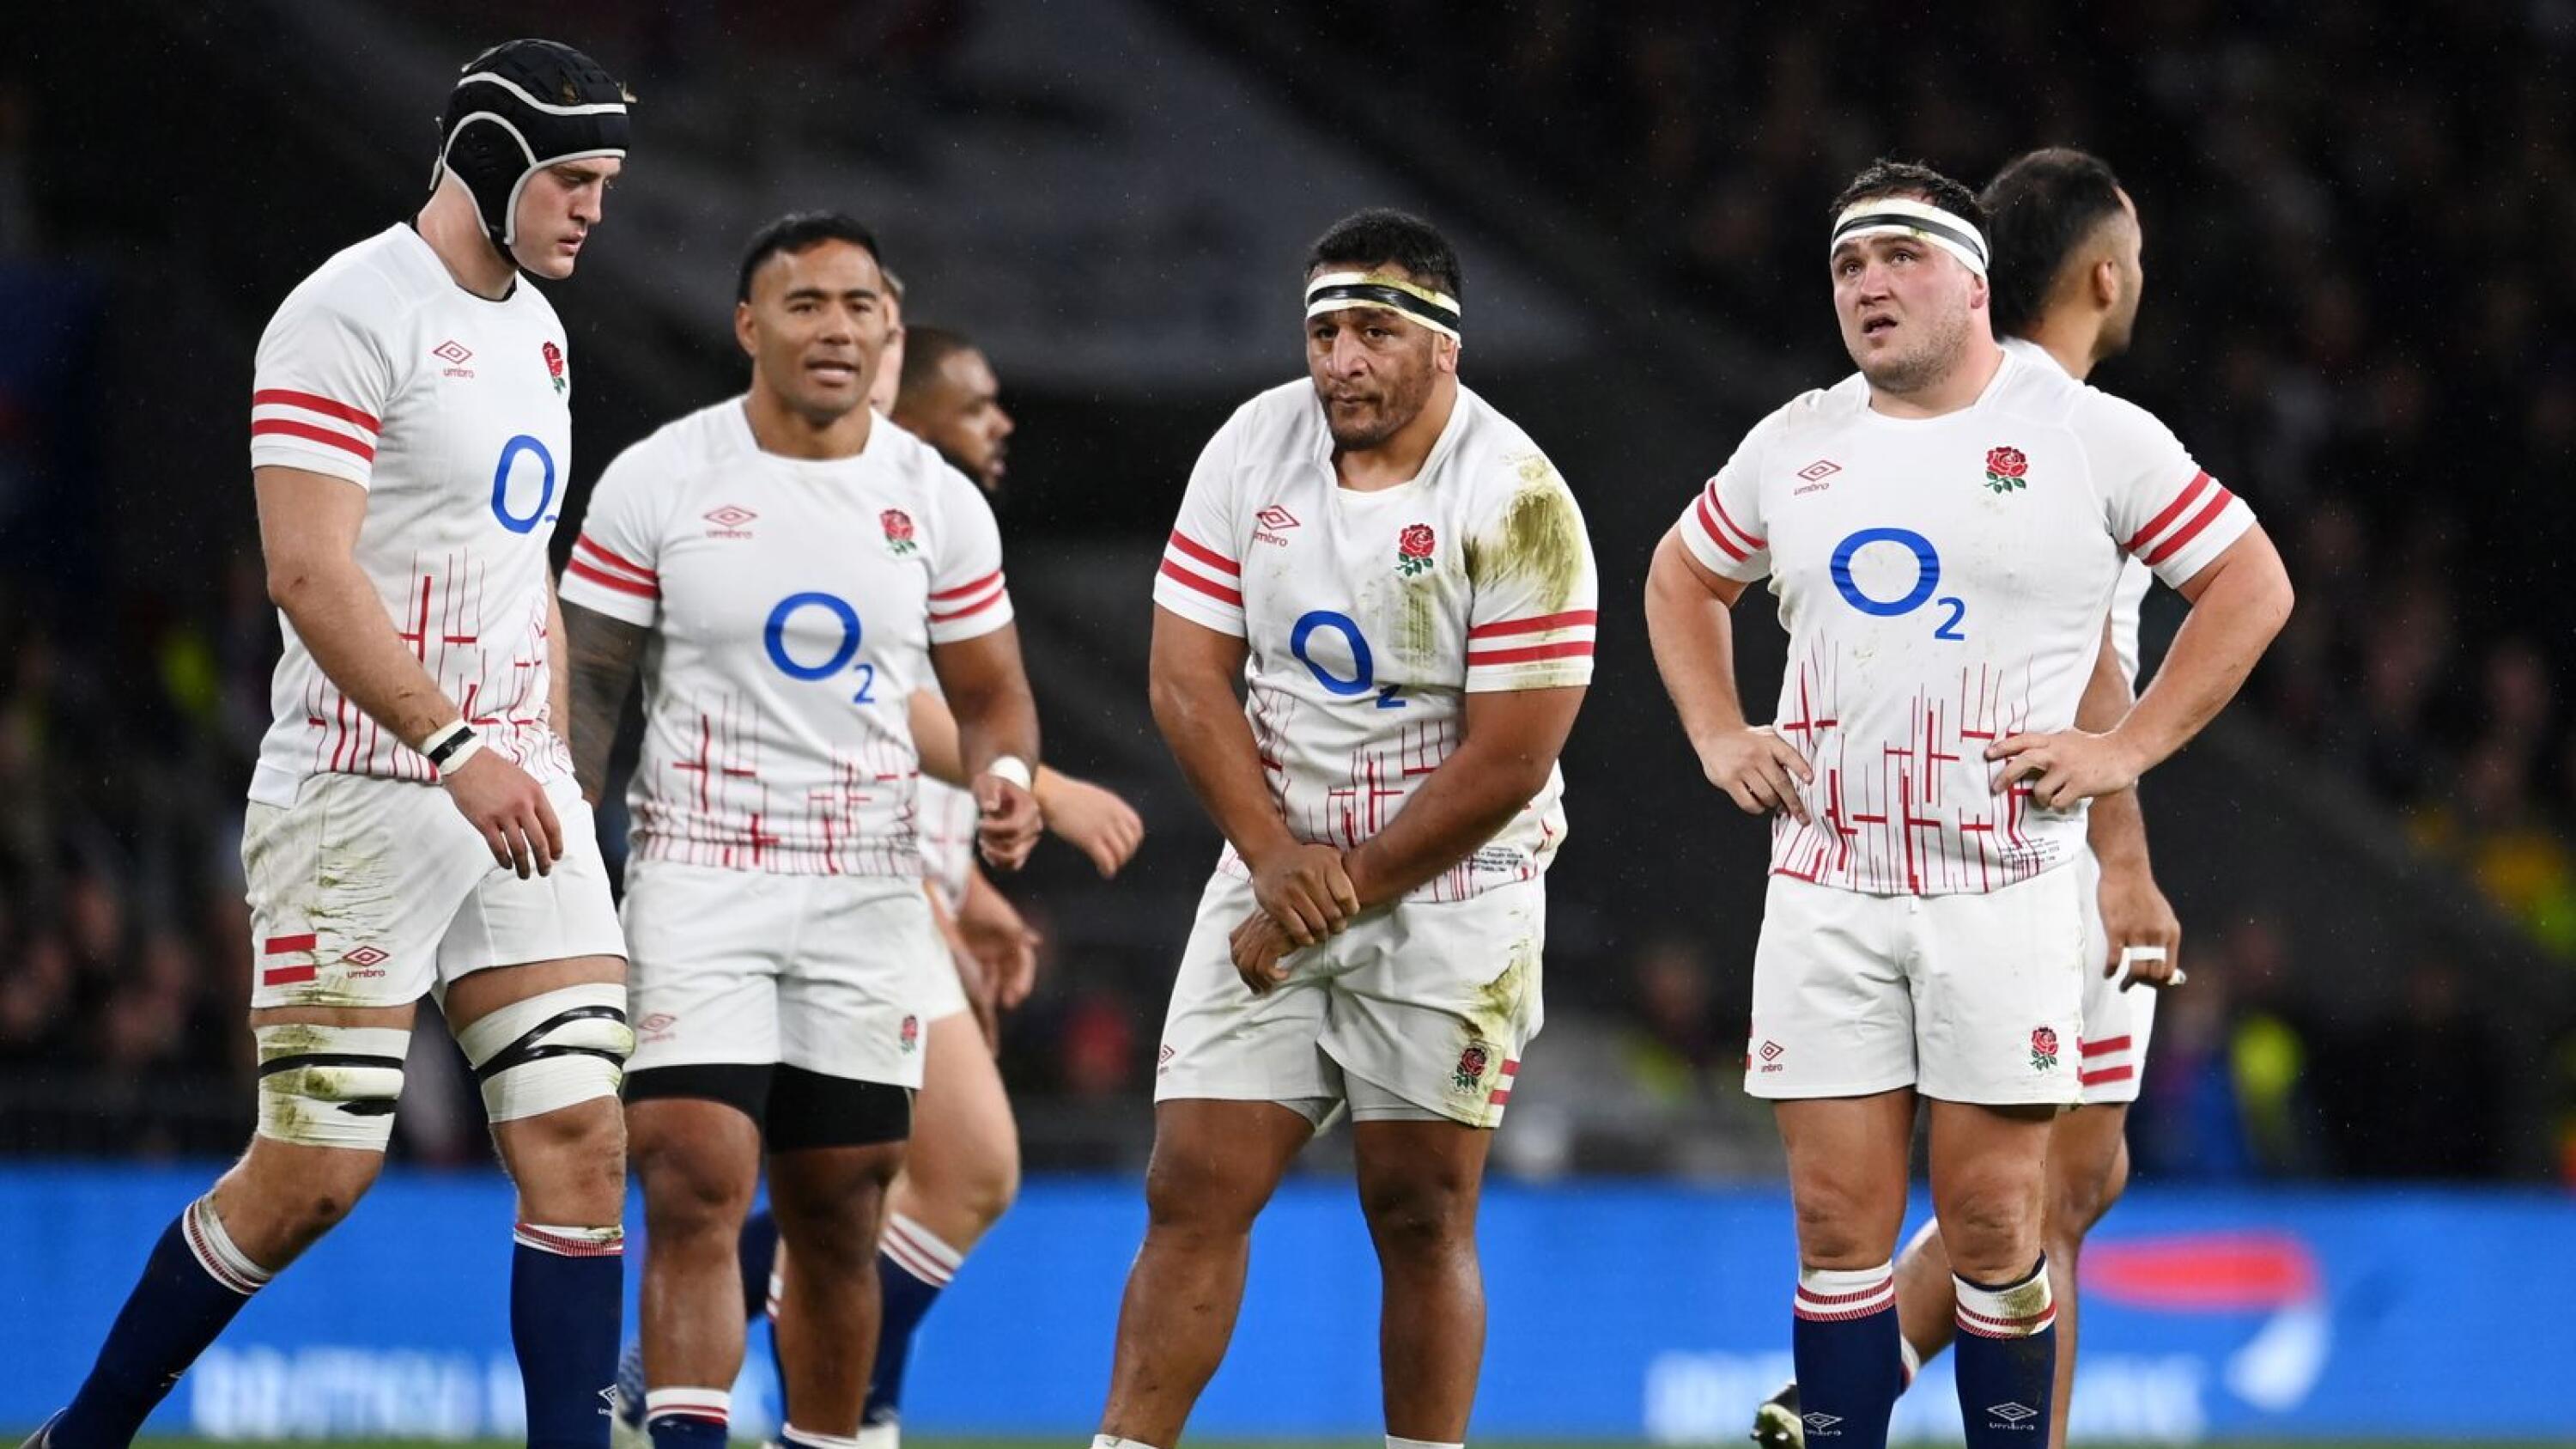 England players look dejected during their Test match against the Springboks at Twickenham in London on Saturday